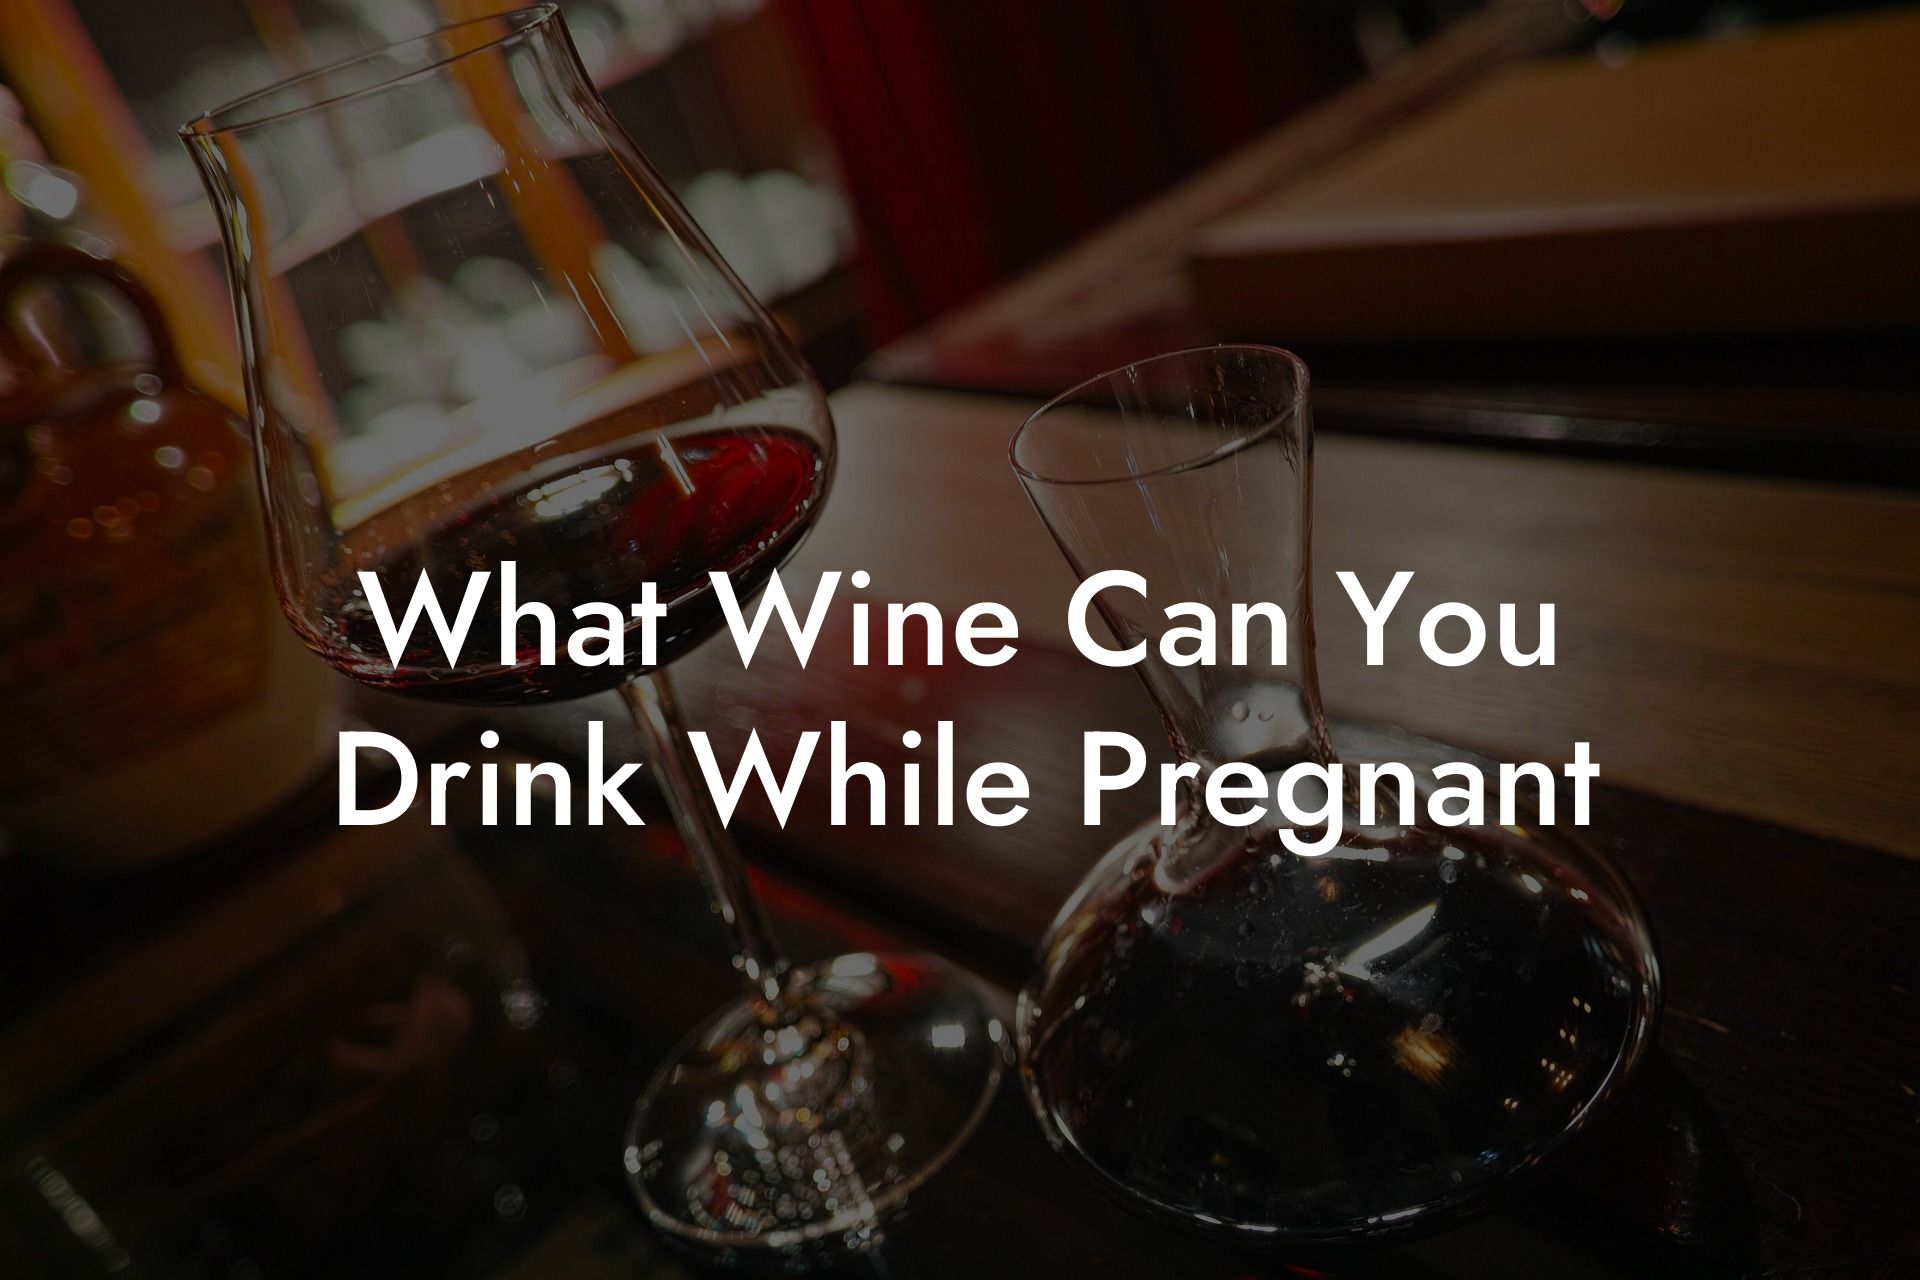 What Wine Can You Drink While Pregnant